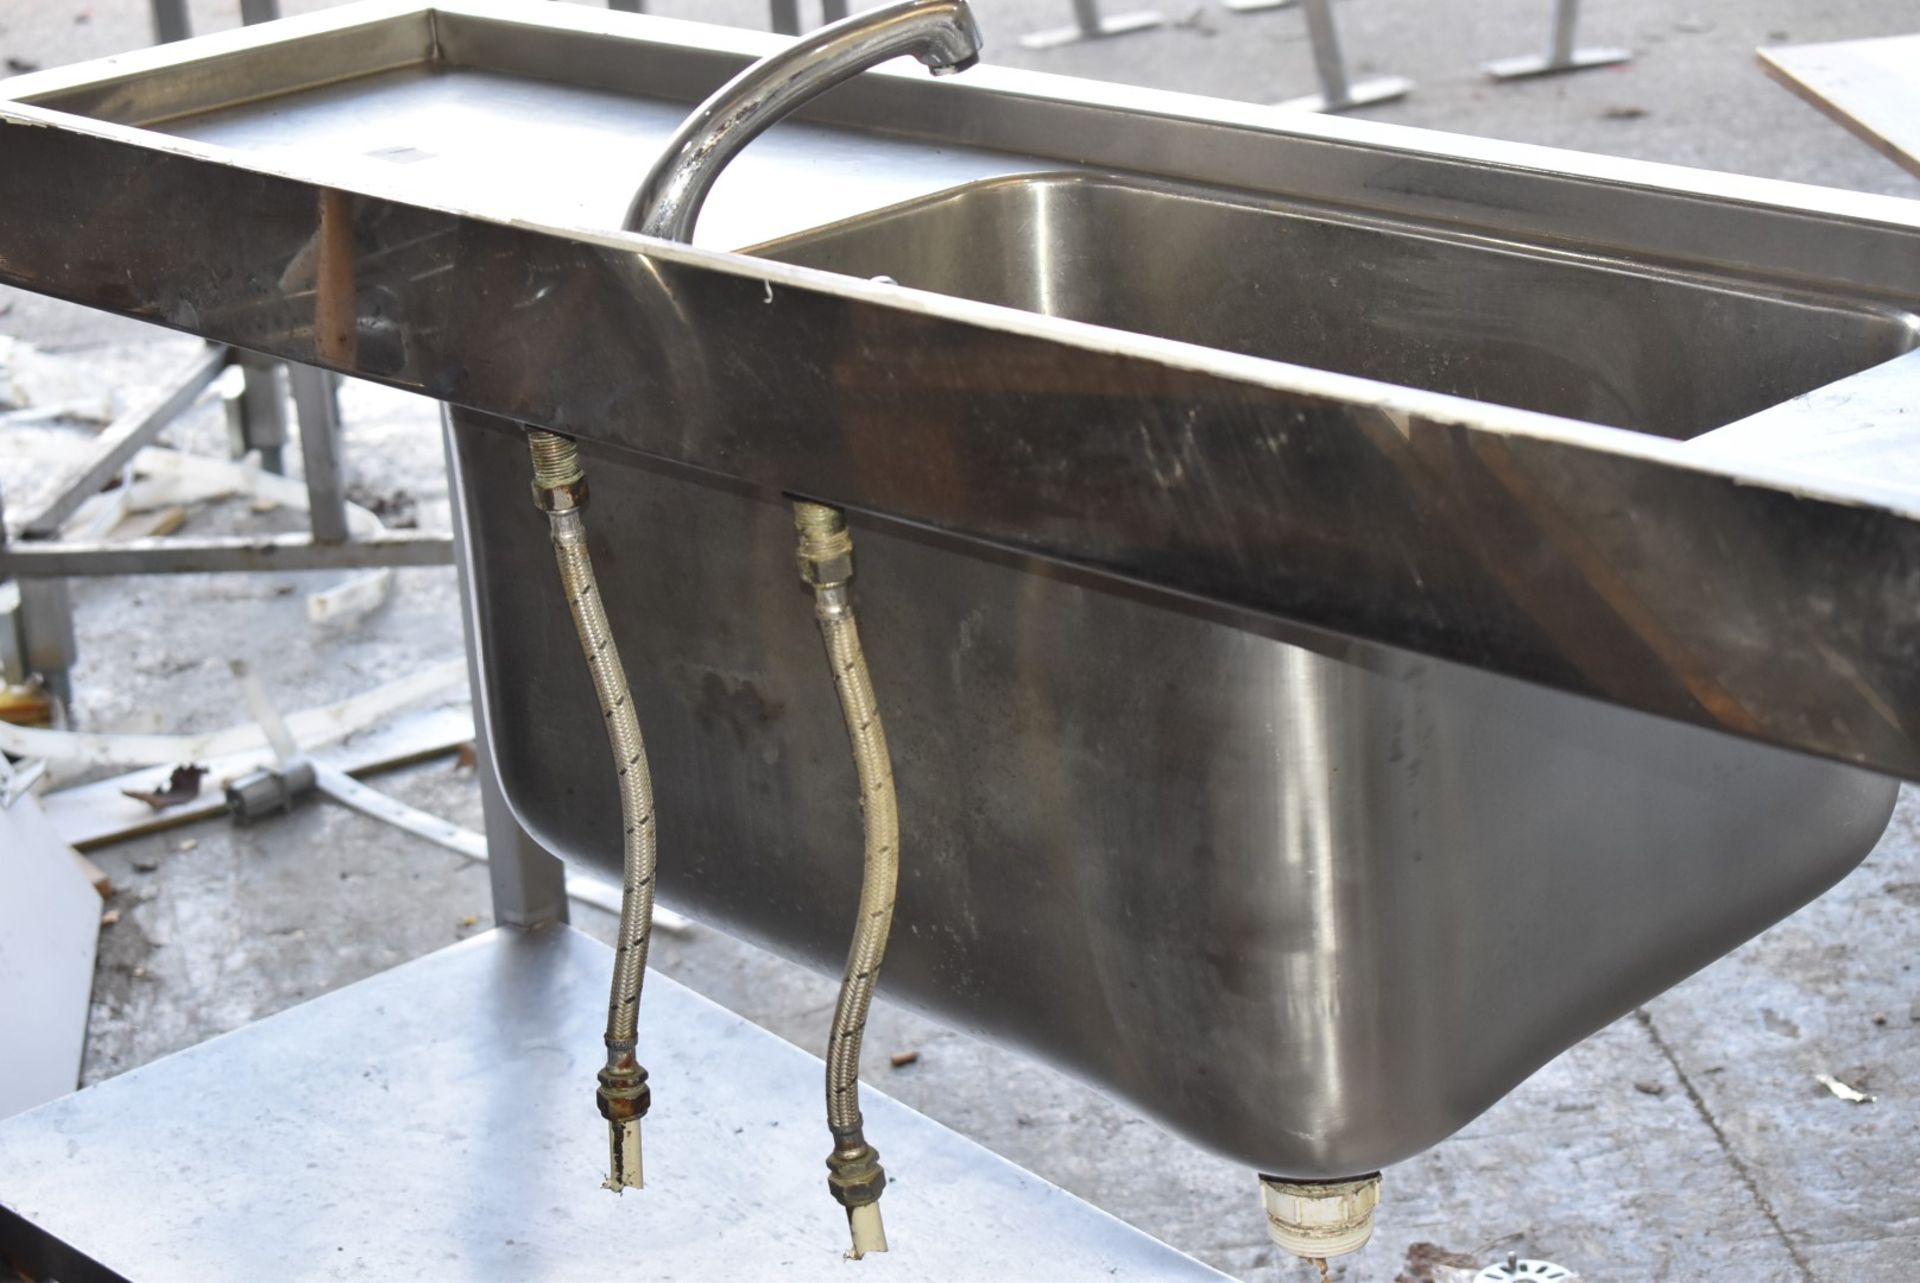 1 x Stainless Steel Wash Unit With Single Basin, Mixer Tap, Undershelf, Corner Upstand - Width 190cm - Image 3 of 11